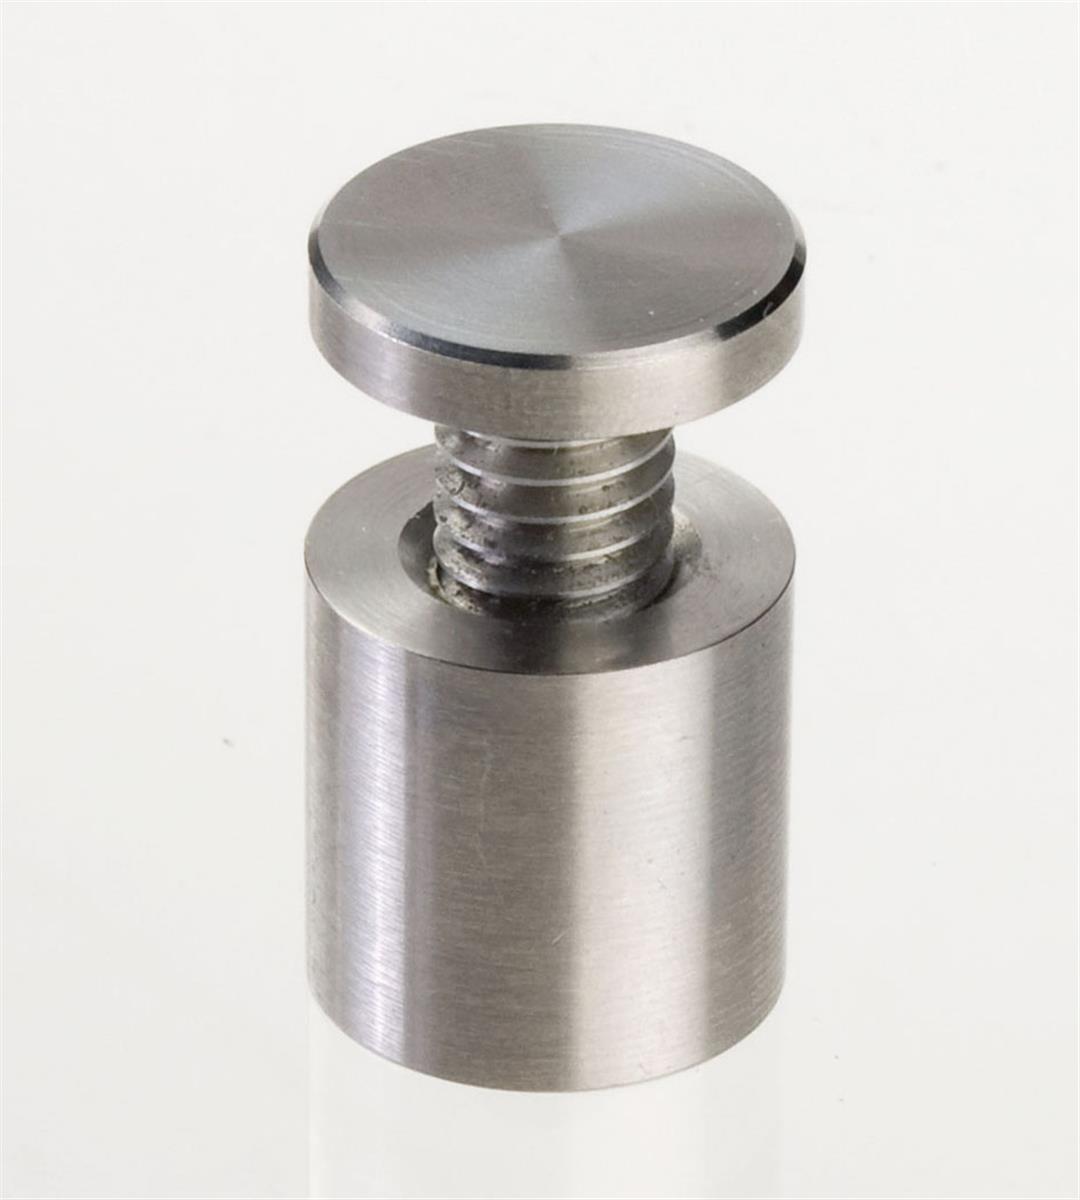 Chrome plated Steel Screw Cover Cap Fasteners Decorative Standoff Sign Hardware 